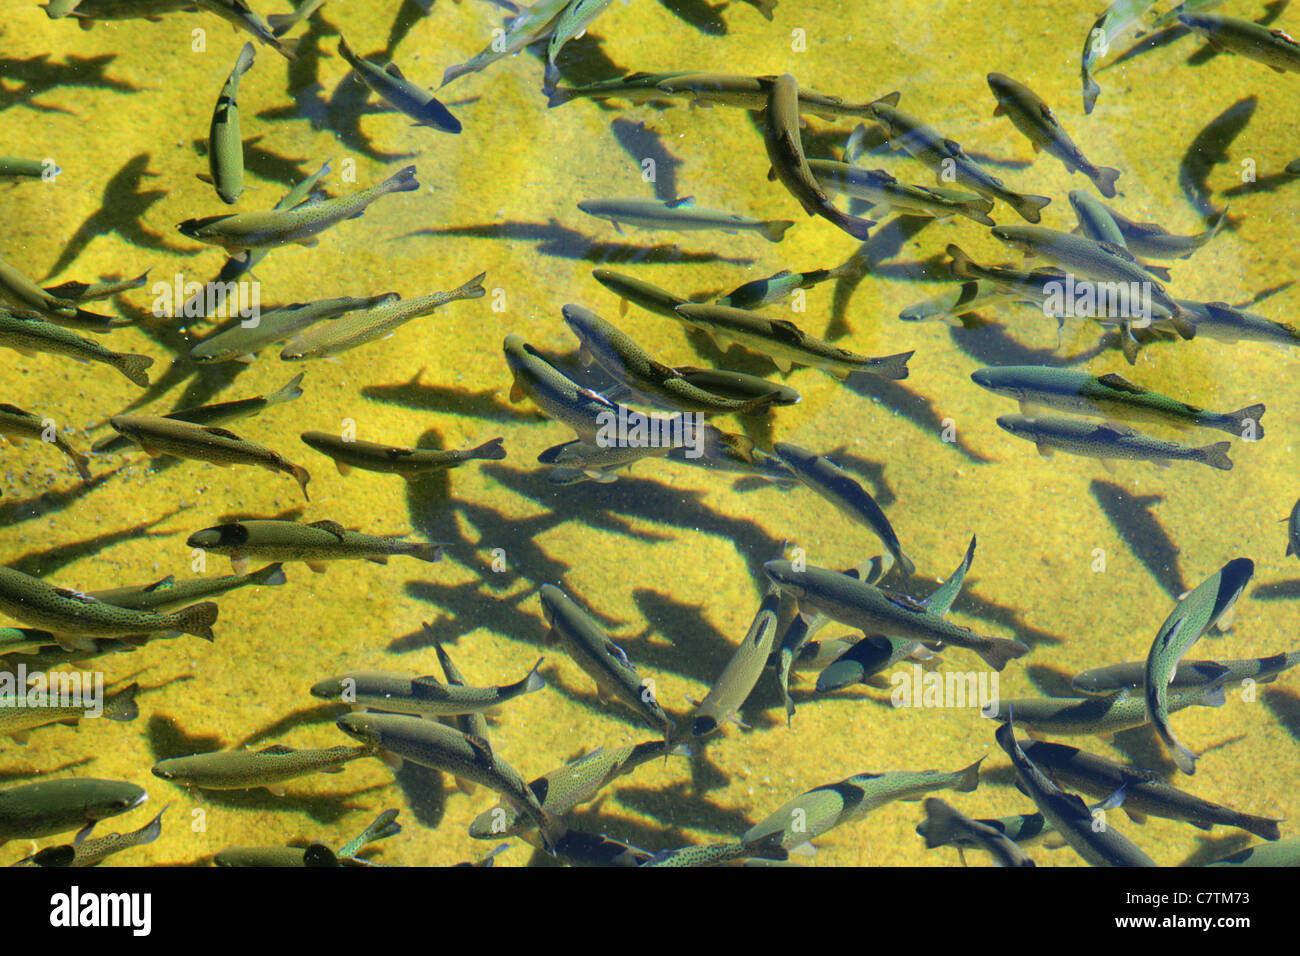 many rainbow trout (Oncorhynchus mykiss) at a fish hatchery Stock Photo